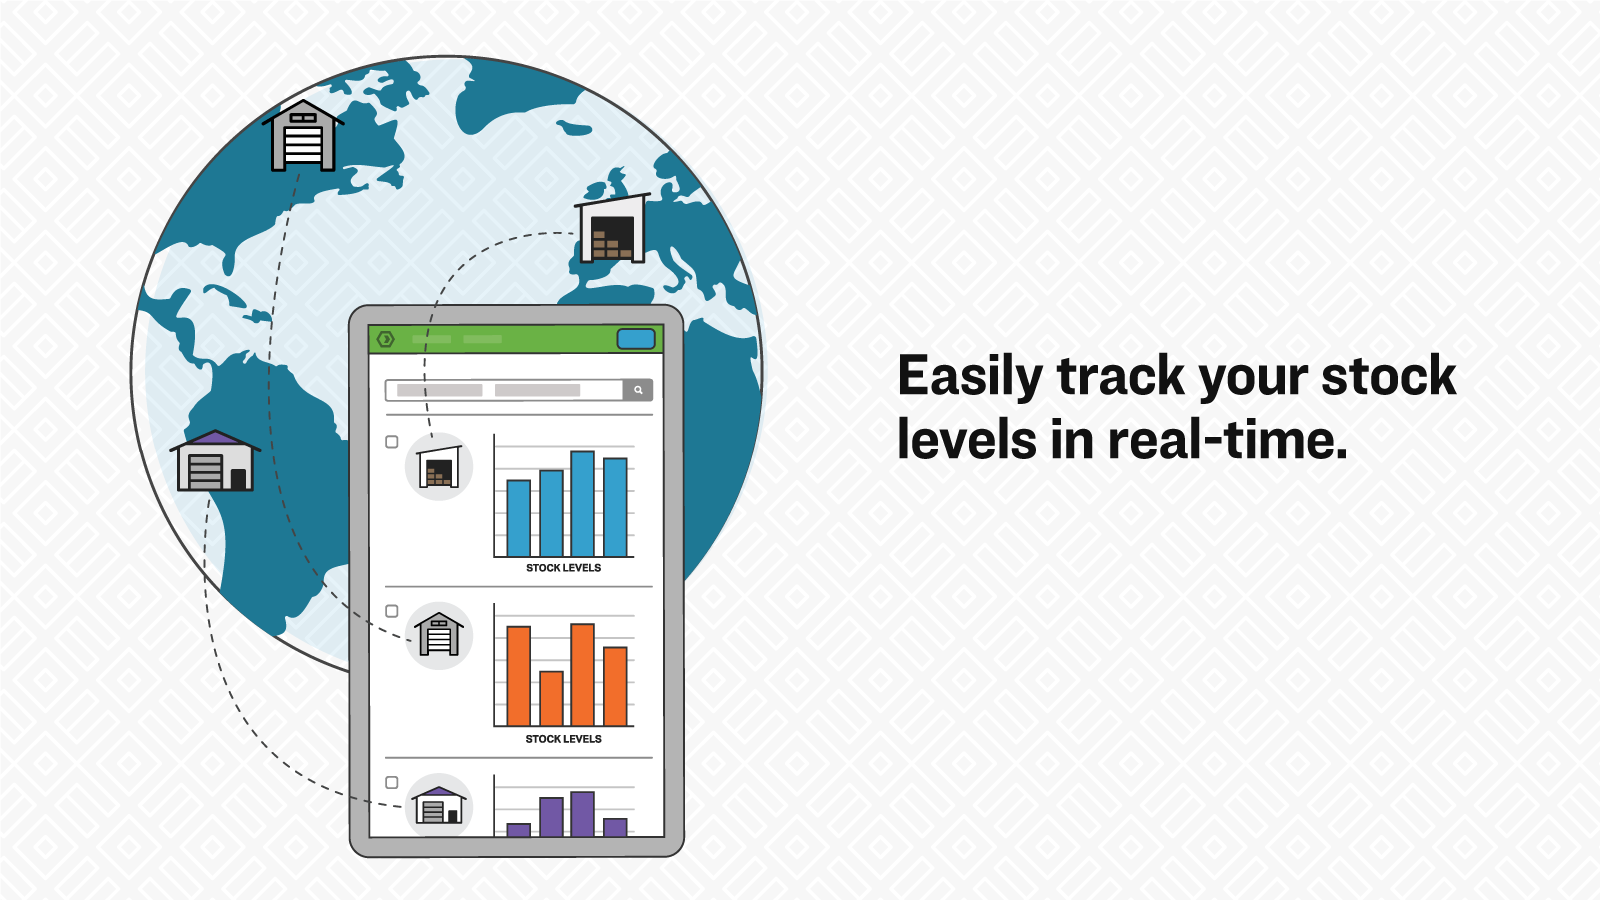 Easily track your stock levels in real time.